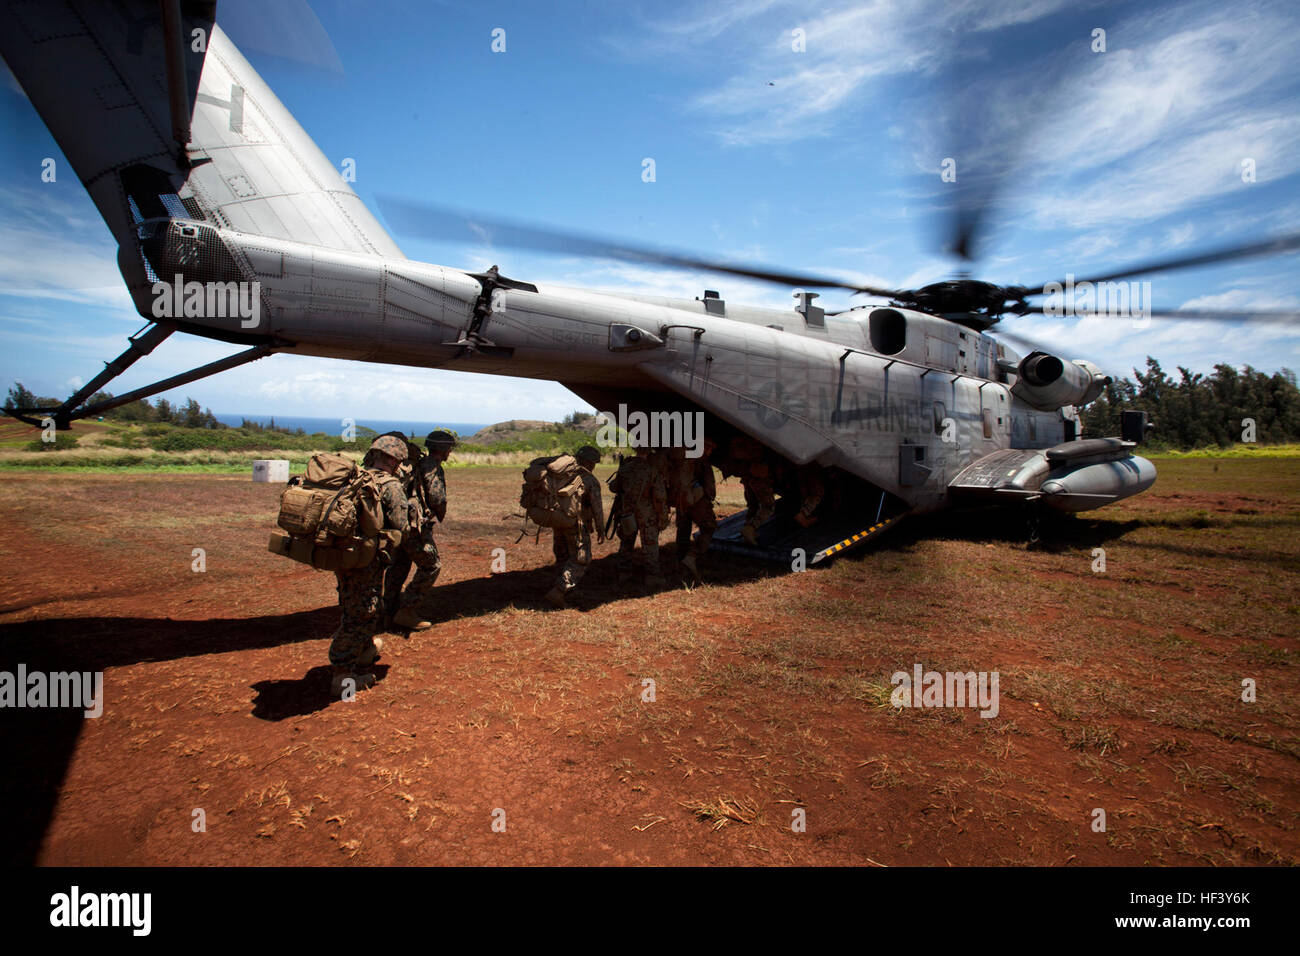 U.S. Marines assigned to 3rd Battalion, 3rd Marine Regiment, board a CH-53E Super Stallion helicopter assigned to Marine Heavy Helicopter Squadron 463 for extraction from Landing Zone Canes, Hawaii, April 29, 2016. HMH-463 conducted personnel extraction and insertion in support of 3rd Battalion, 3rd Marine Regiment during their Marine Corps Combat Readiness Evaluation. (U.S. Marine Corps photo by Lance Cpl. Julian A. Temblador) All Aboard (26214525833) Stock Photo